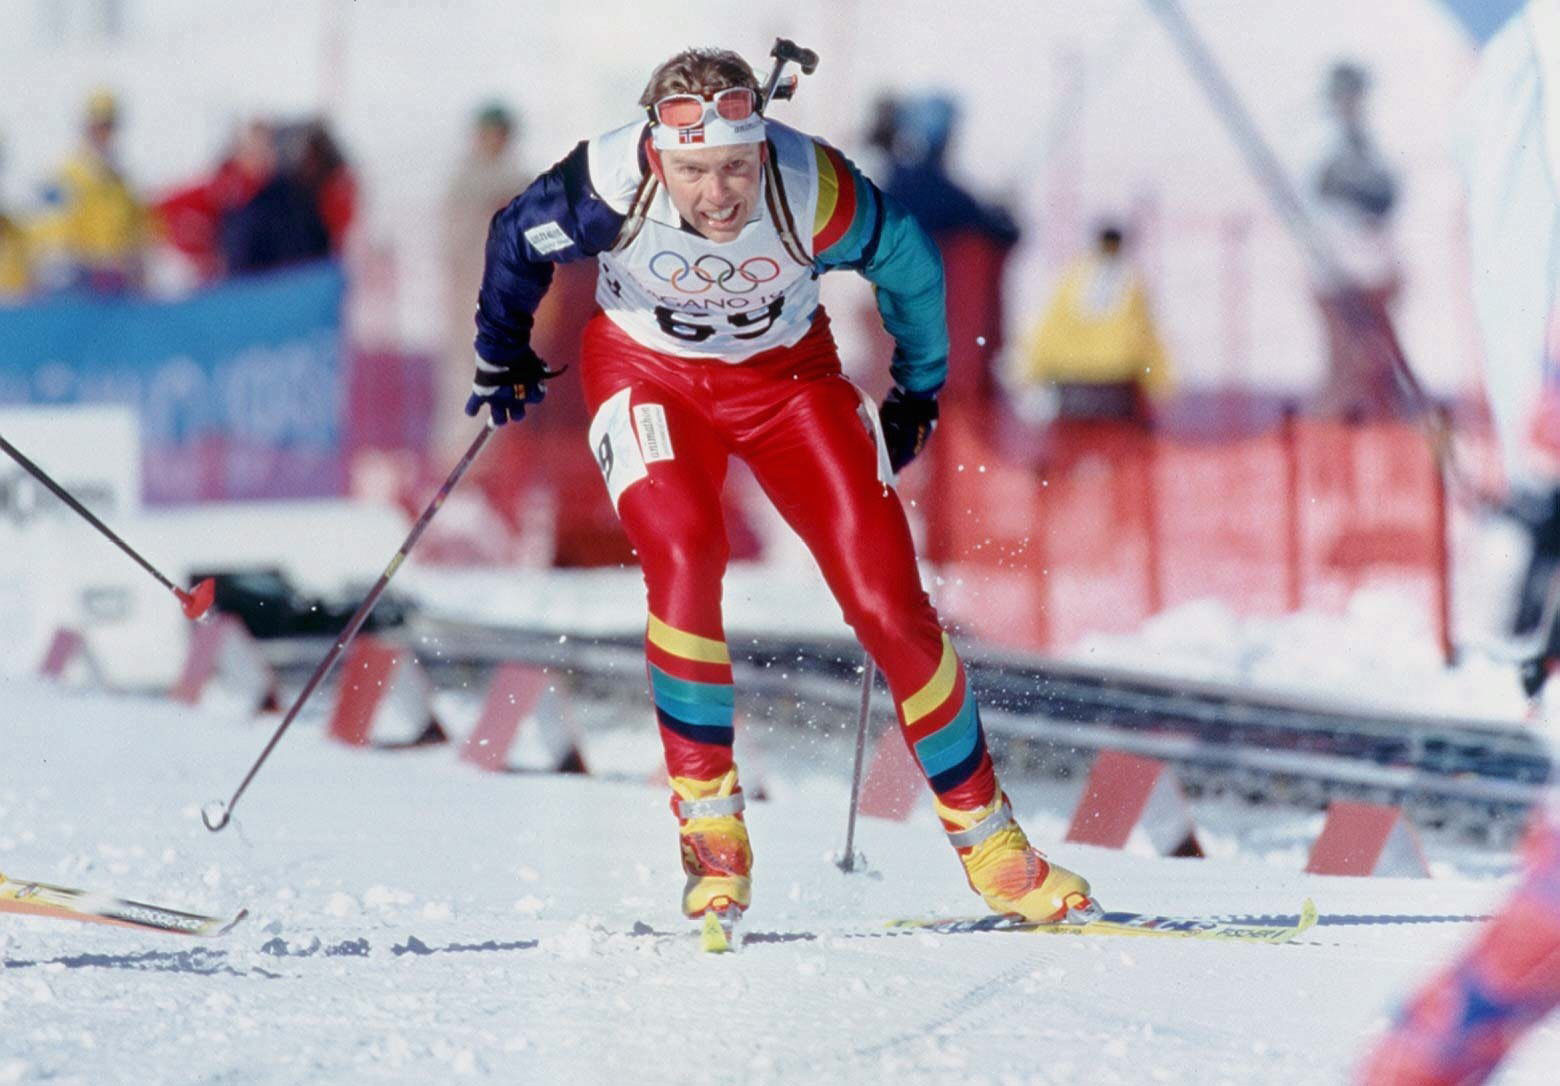 Tributes paid after triple Olympic biathlon champion Hanevold dies aged 49